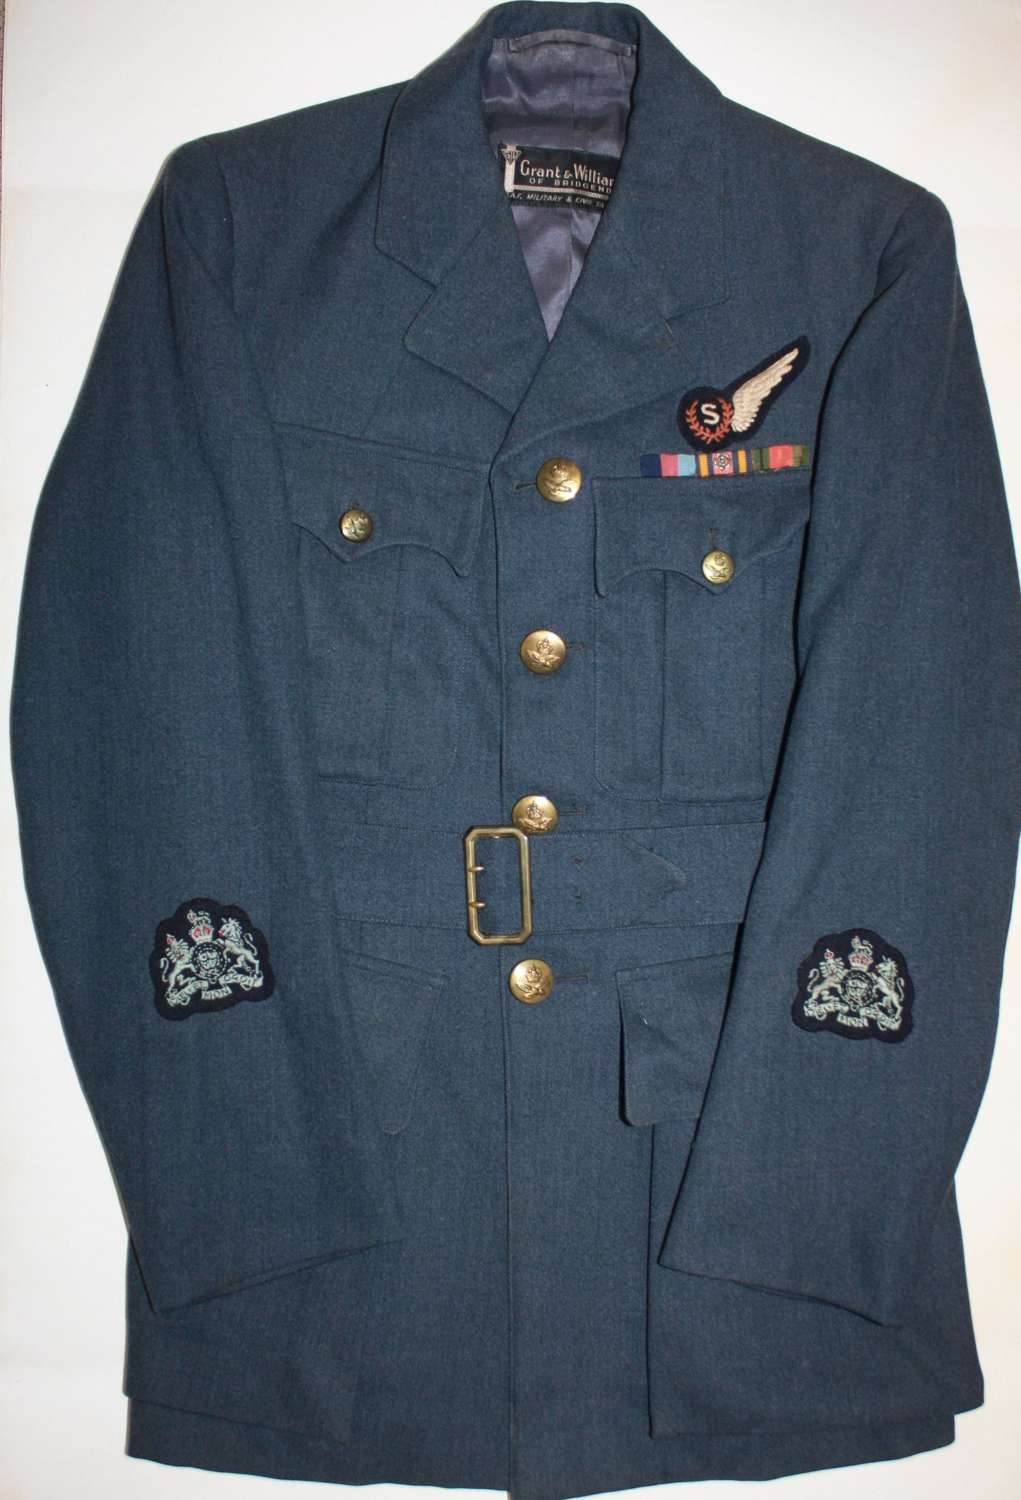 A WWII RAF Warrant Officers signalers tunic and log book grouping